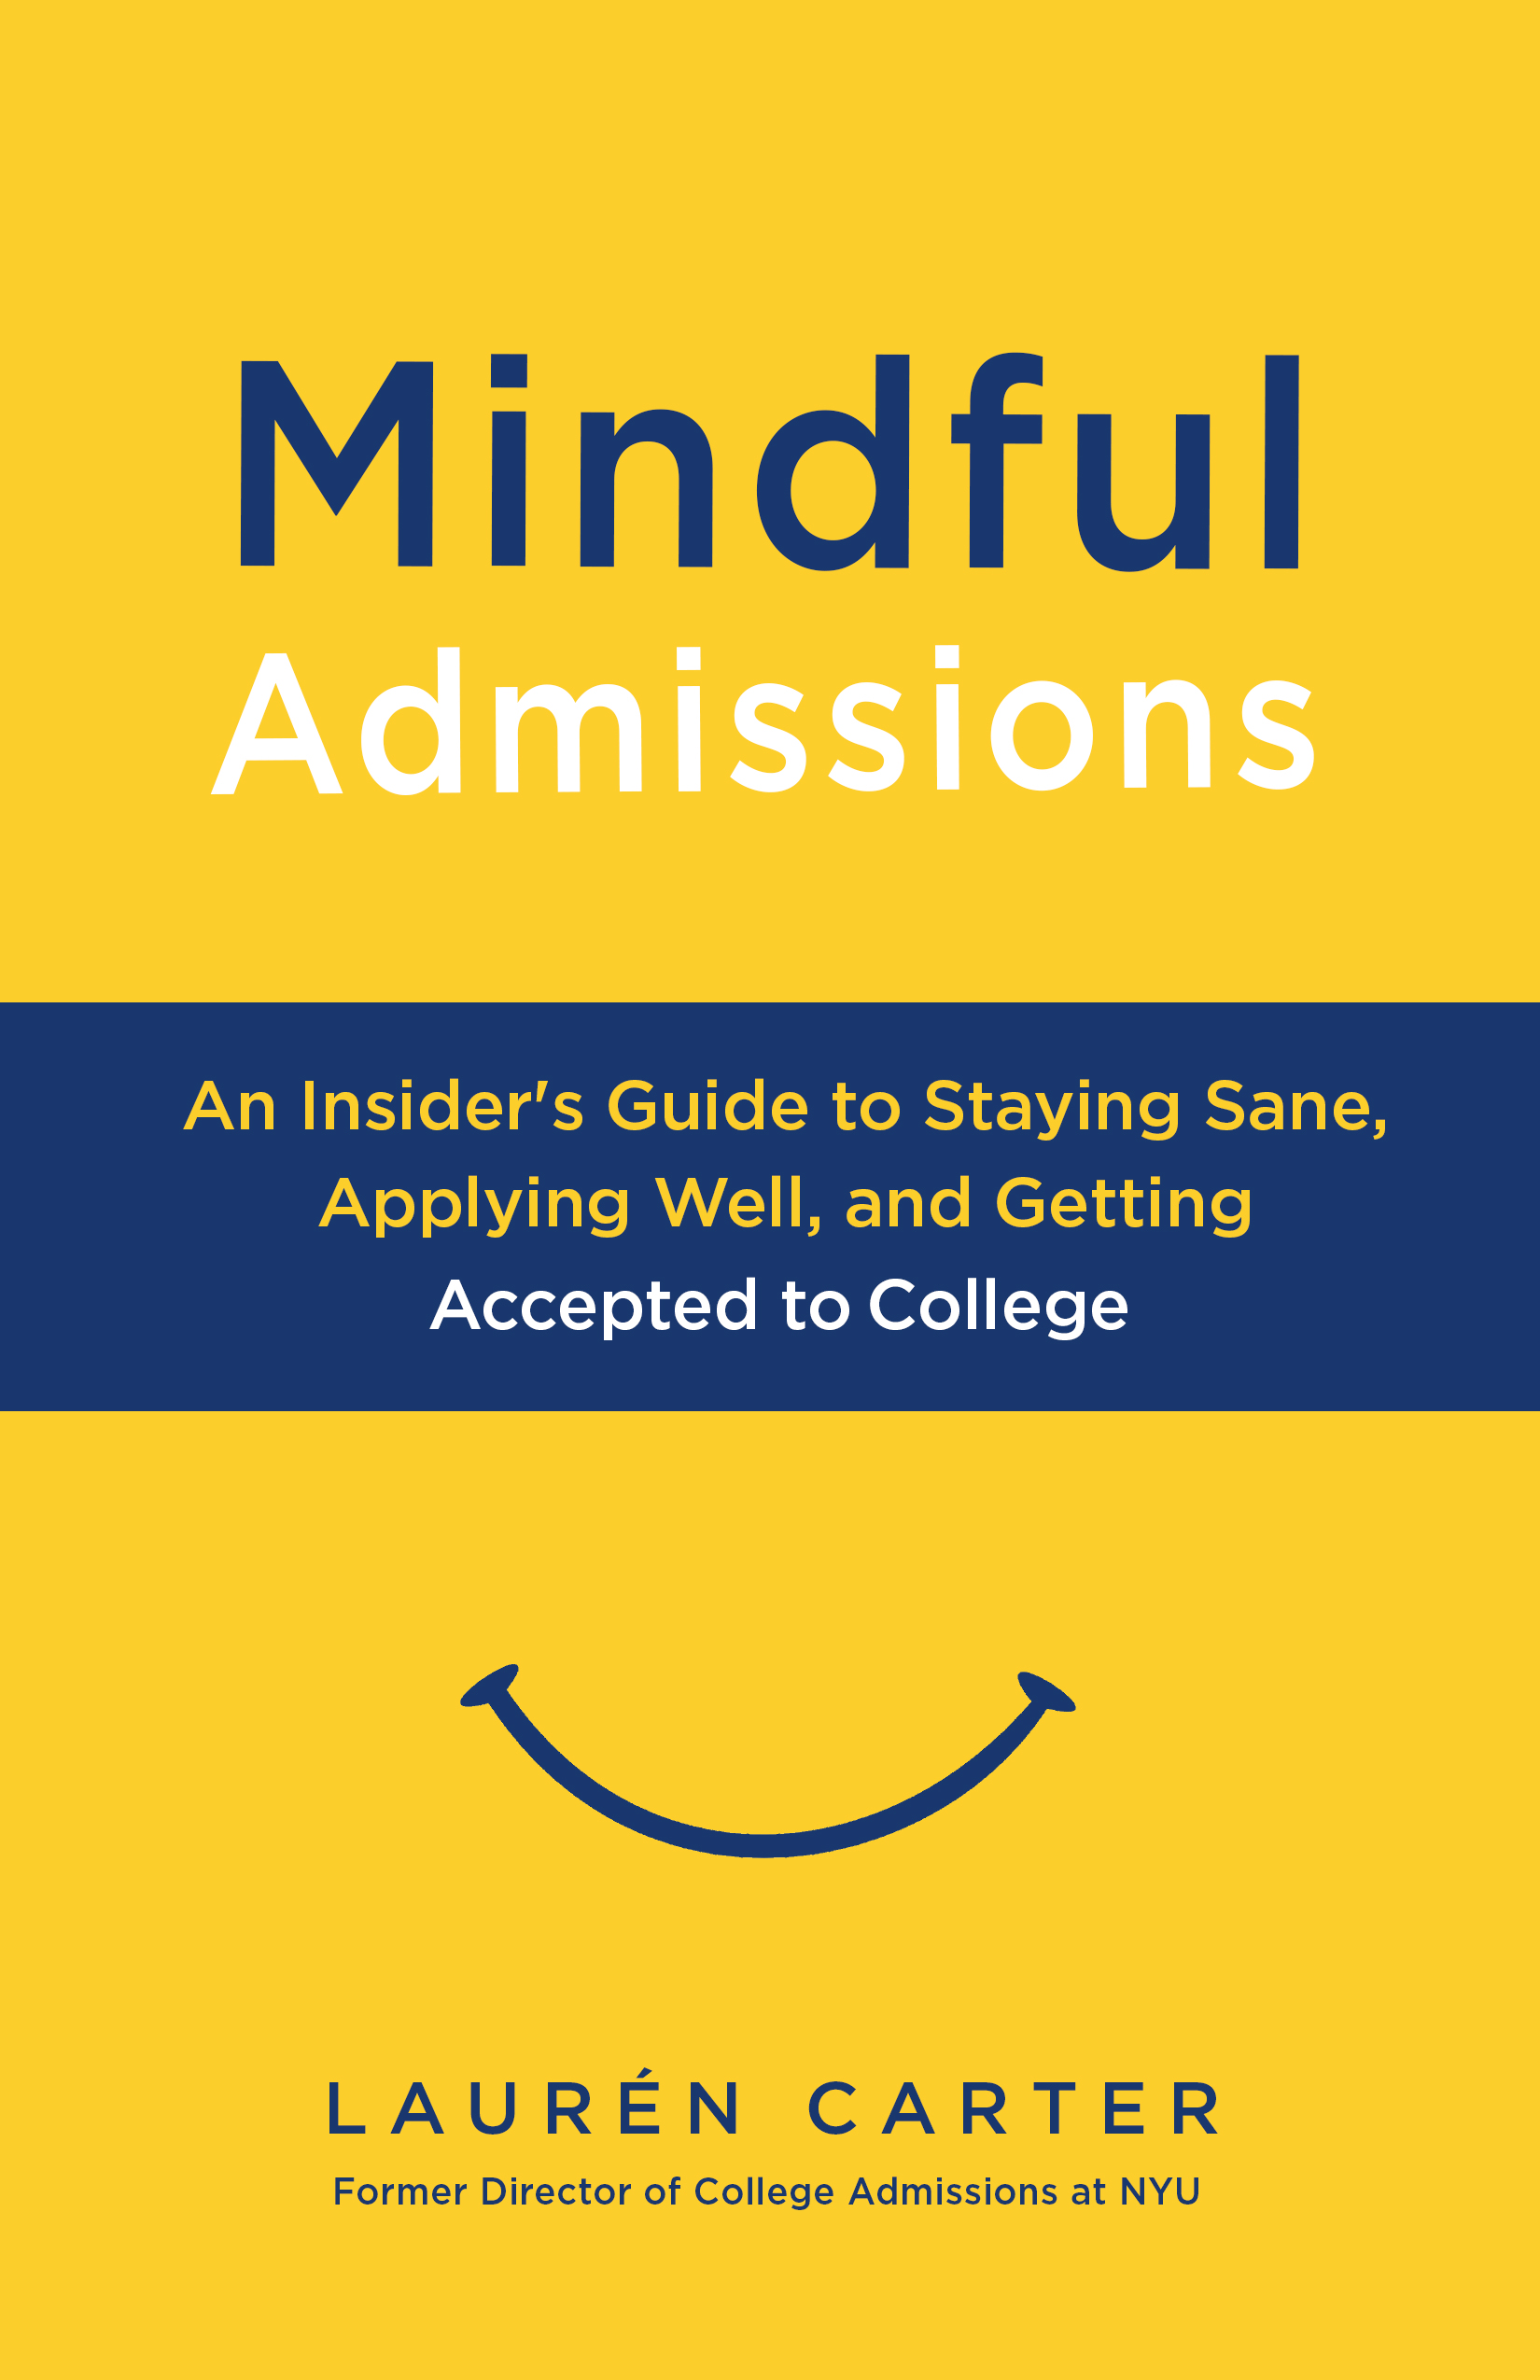 FREE: Mindful Admissions: An Insider’s Guide to Staying Sane, Applying Well and Getting Accepted to College by Laurén Carter